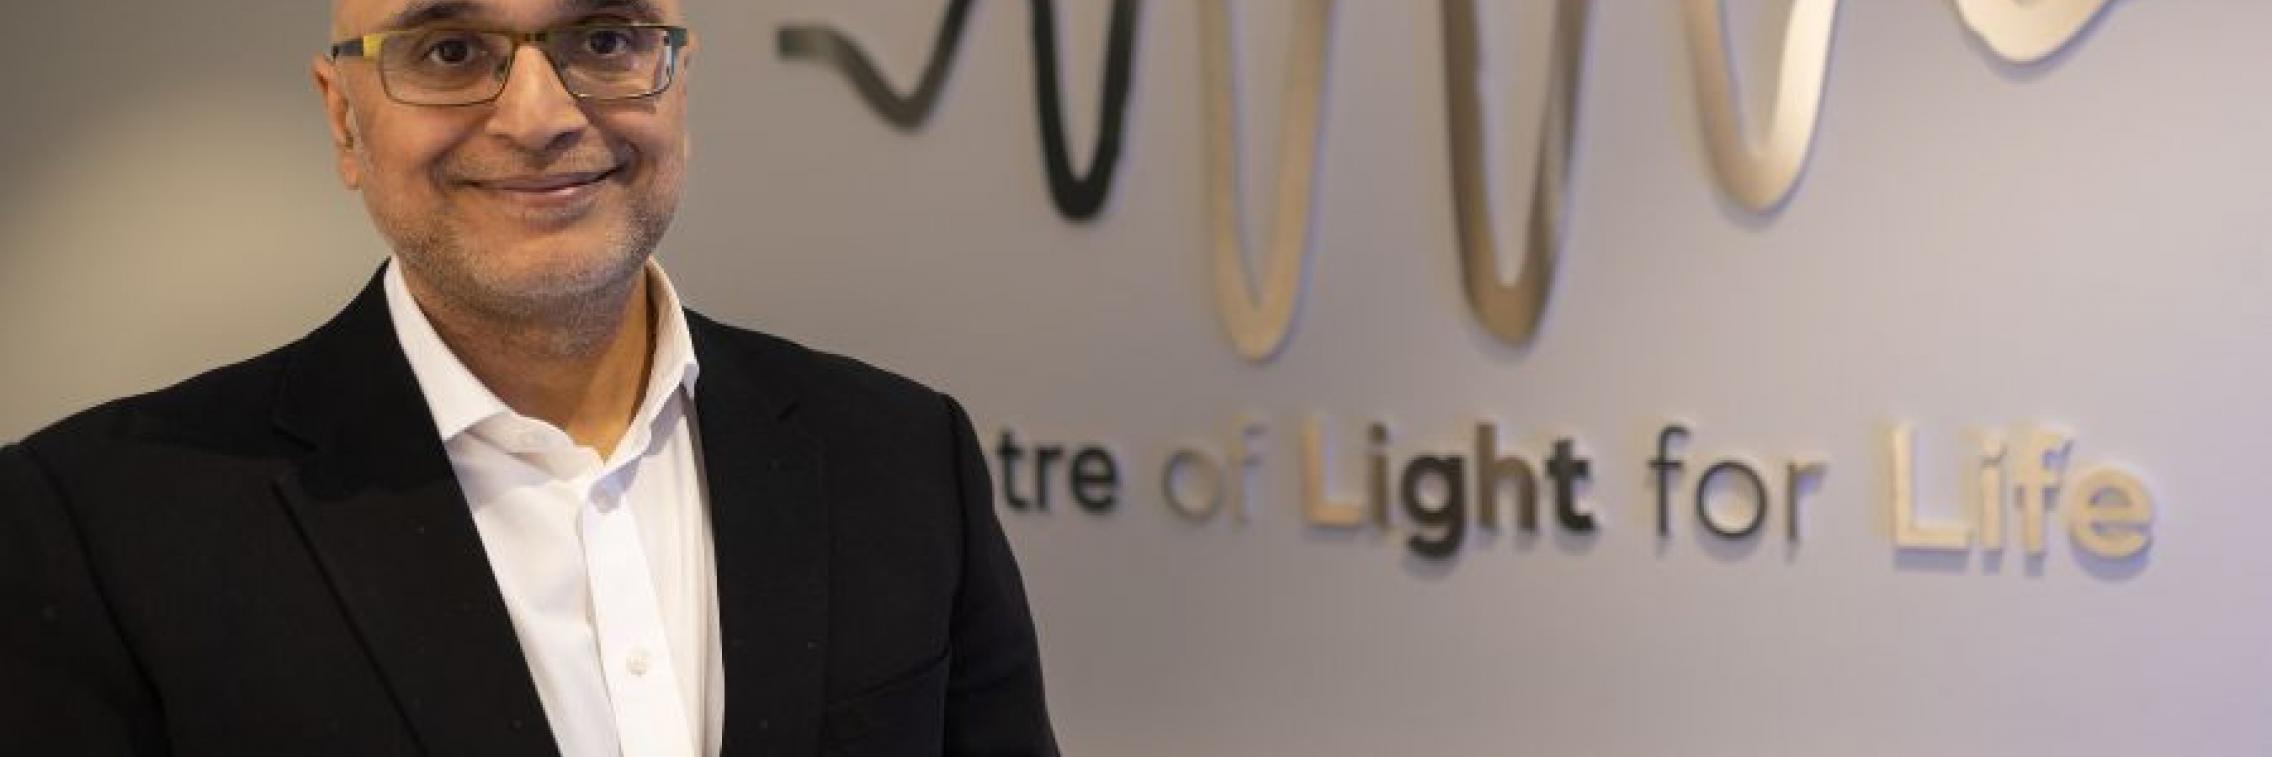 Prof Kishan Dholakia in front of the Centre of Light for Life's logo